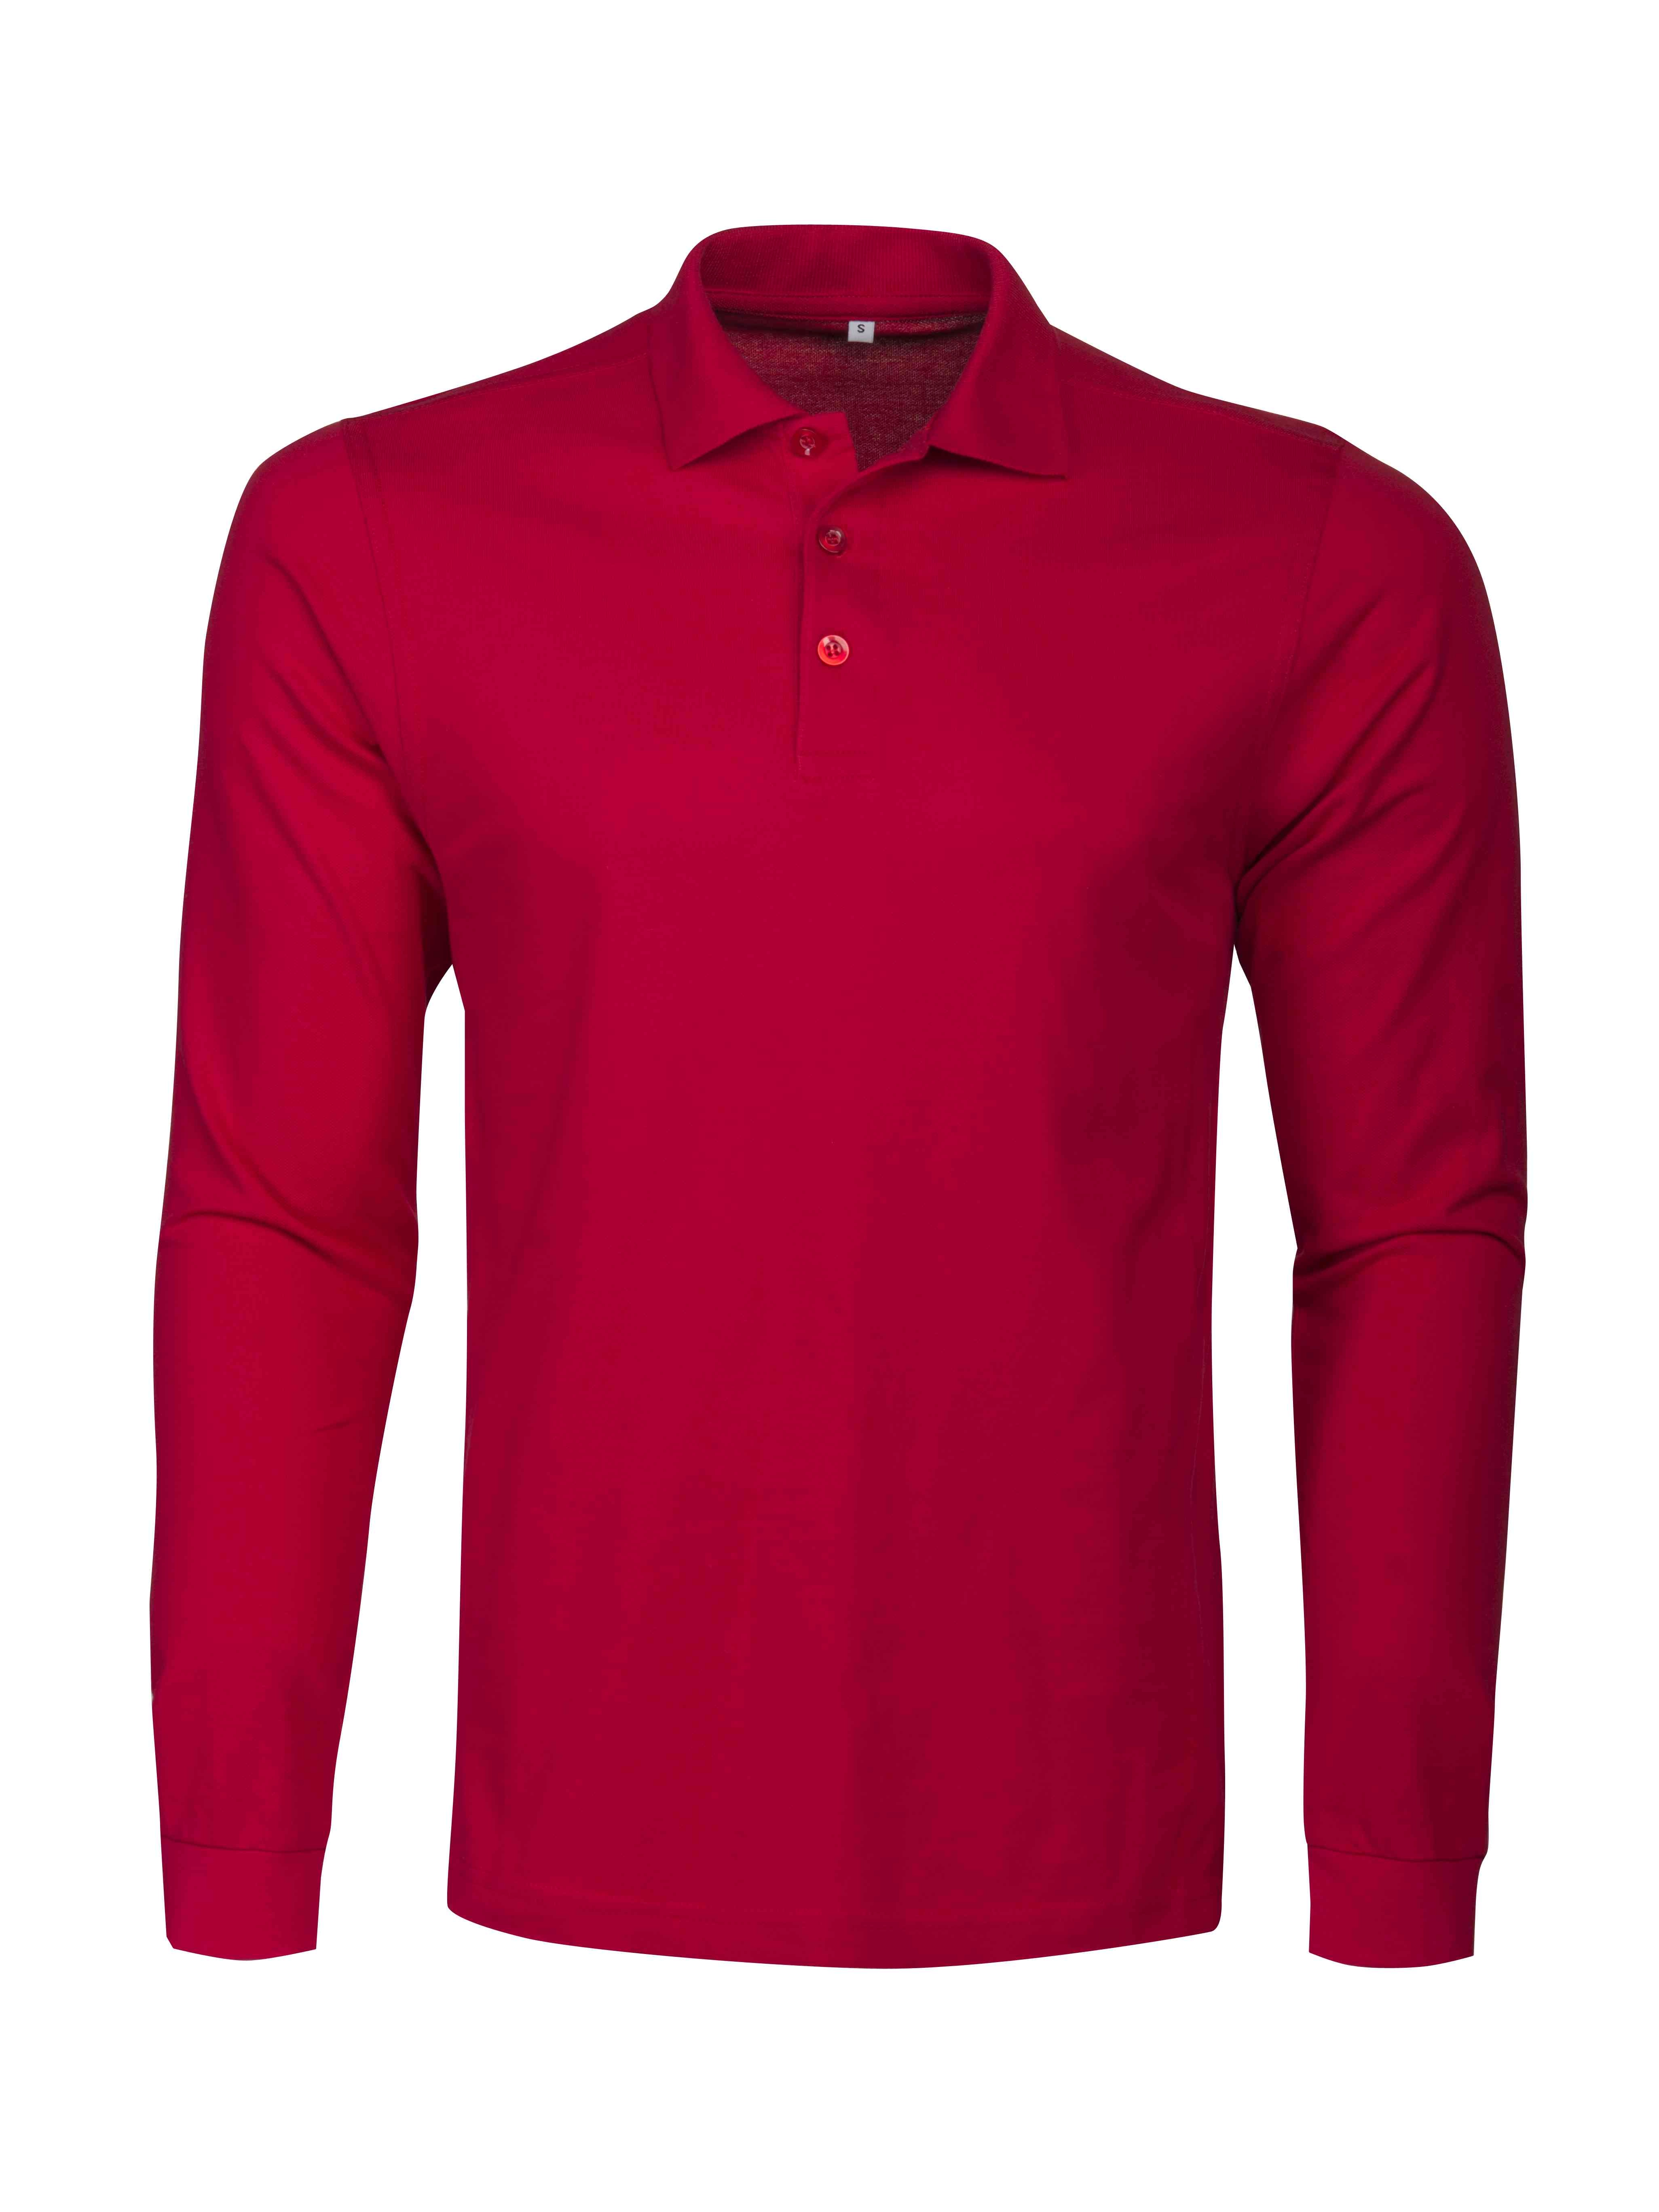 SURF POLO RSX L/S RED PE-2265011-400-7